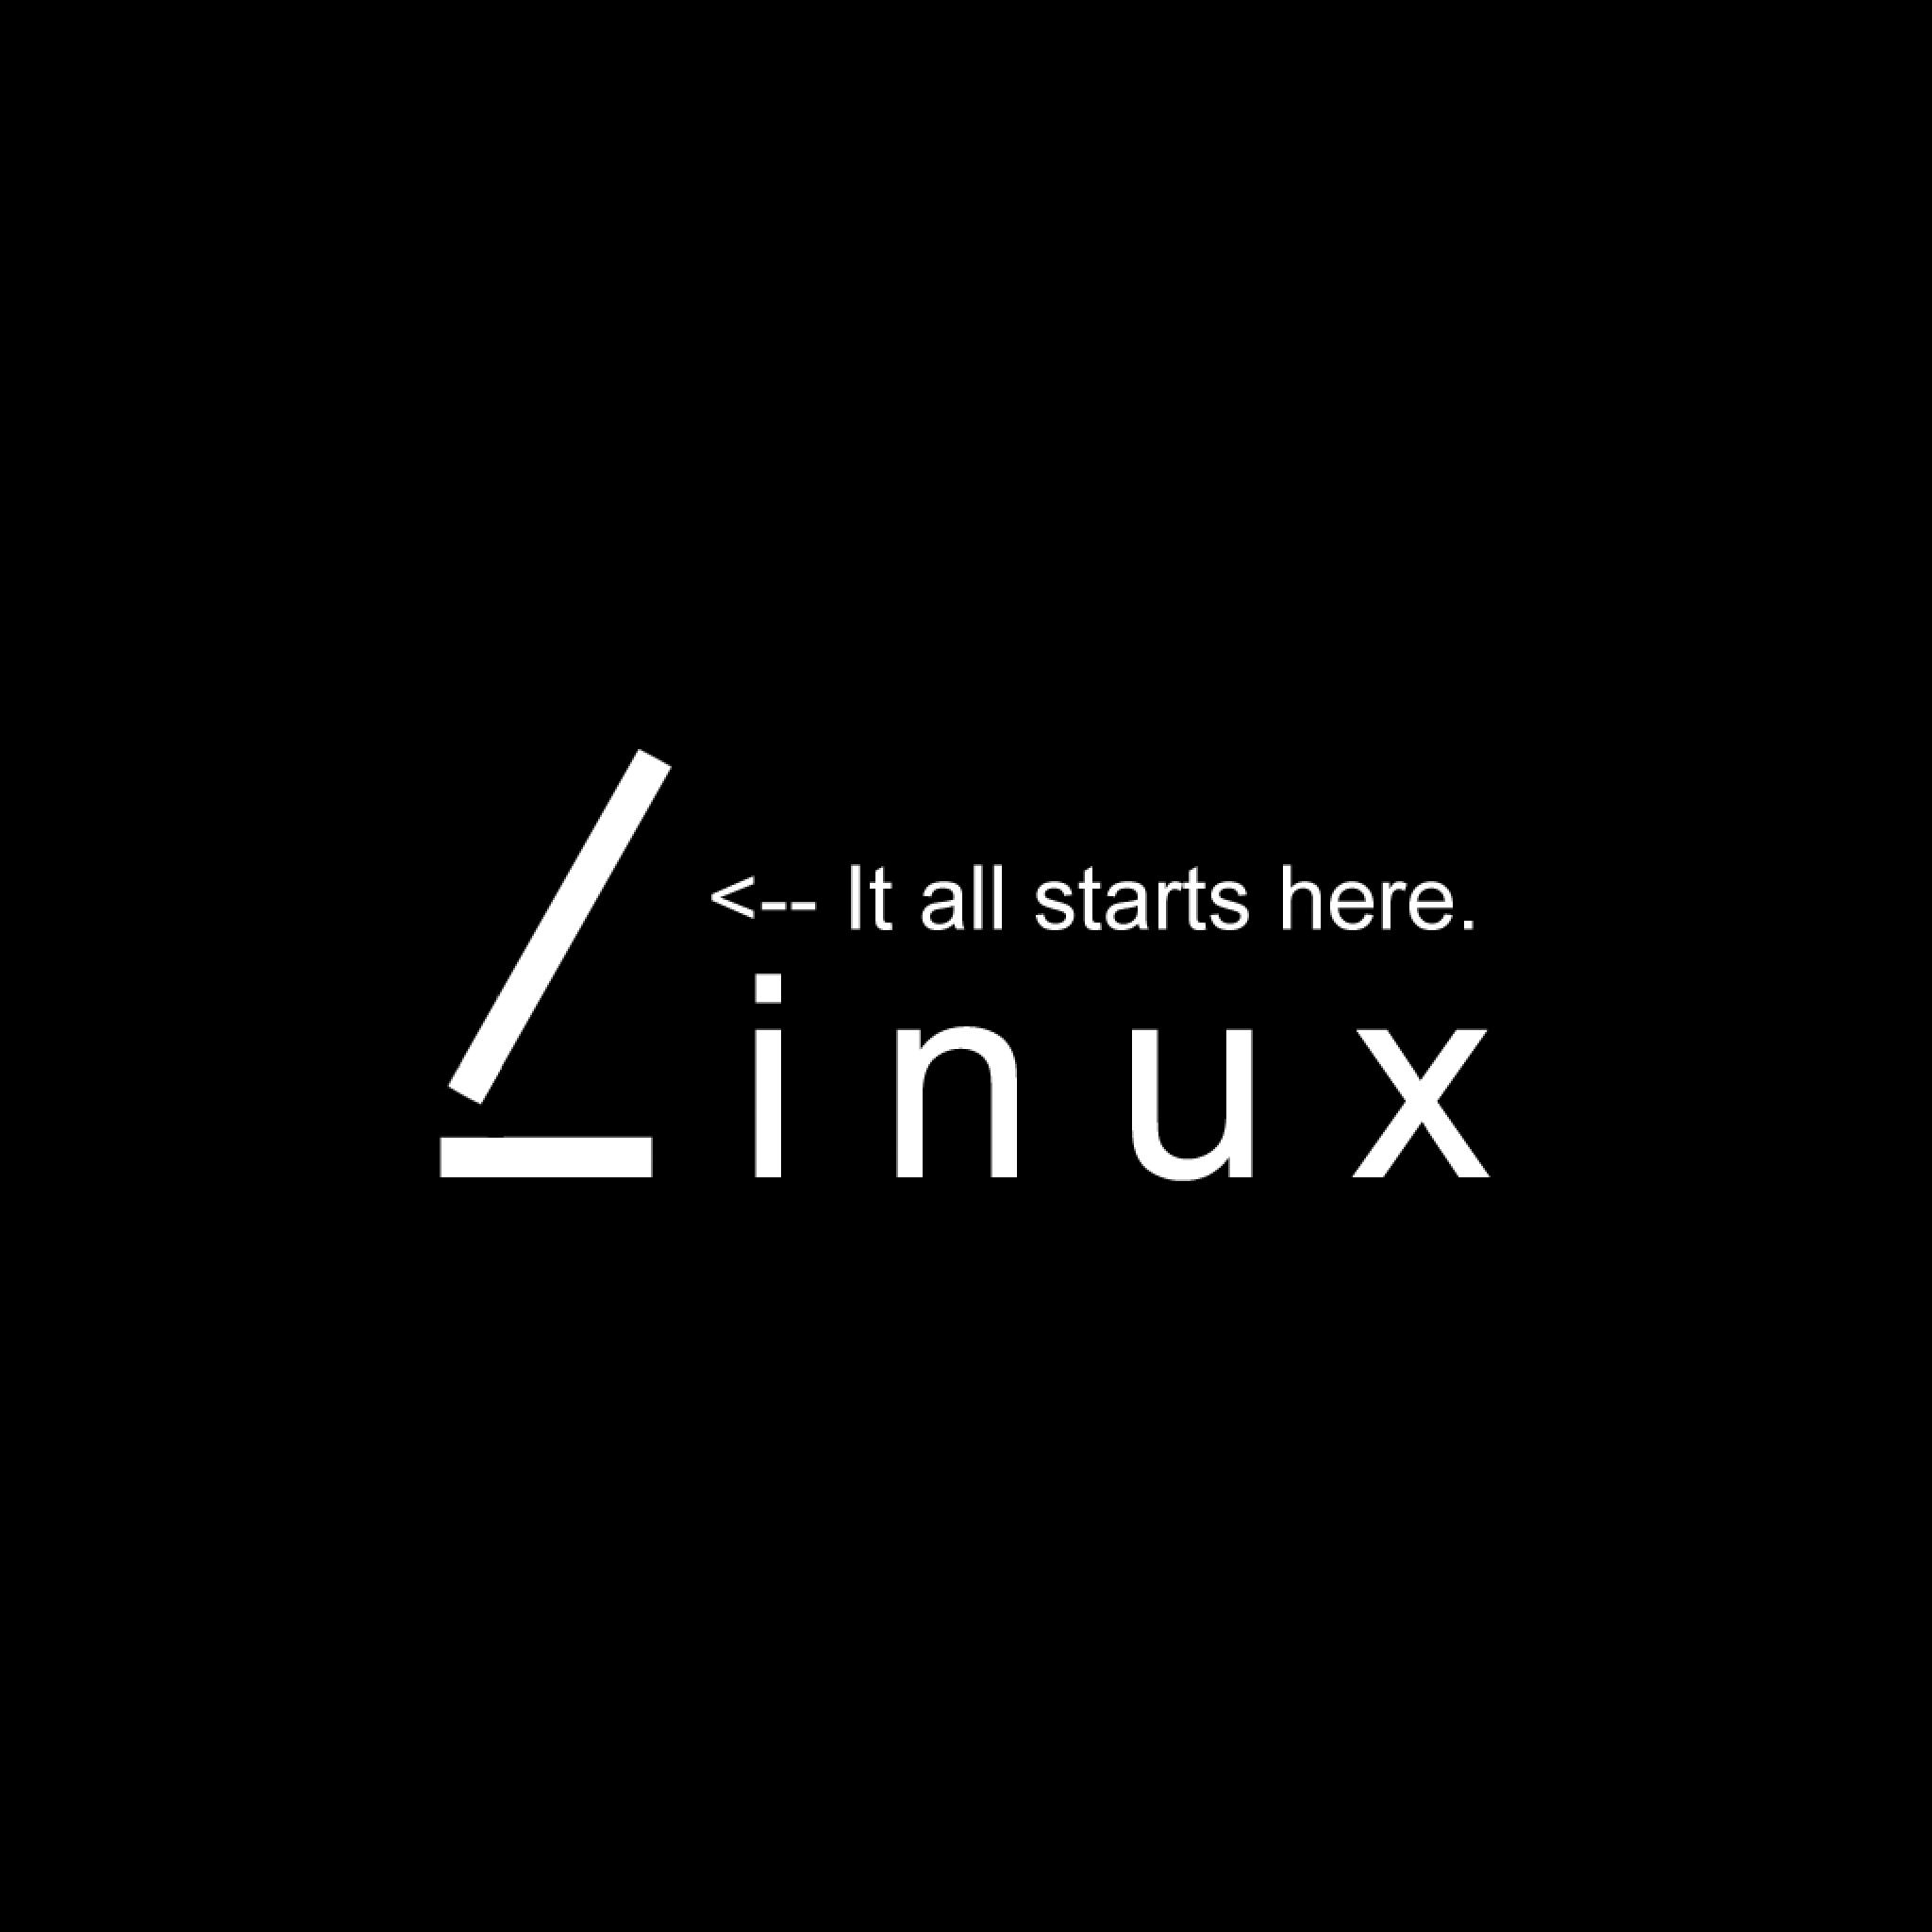 Computer Brand New Ipad Linux It All Starts Here Wallpaper For Ipad 4 Computer Wallpapers The New Ipad Wallpapers Ipad 4 Wallpapers Ipad タブレット壁紙ギャラリー